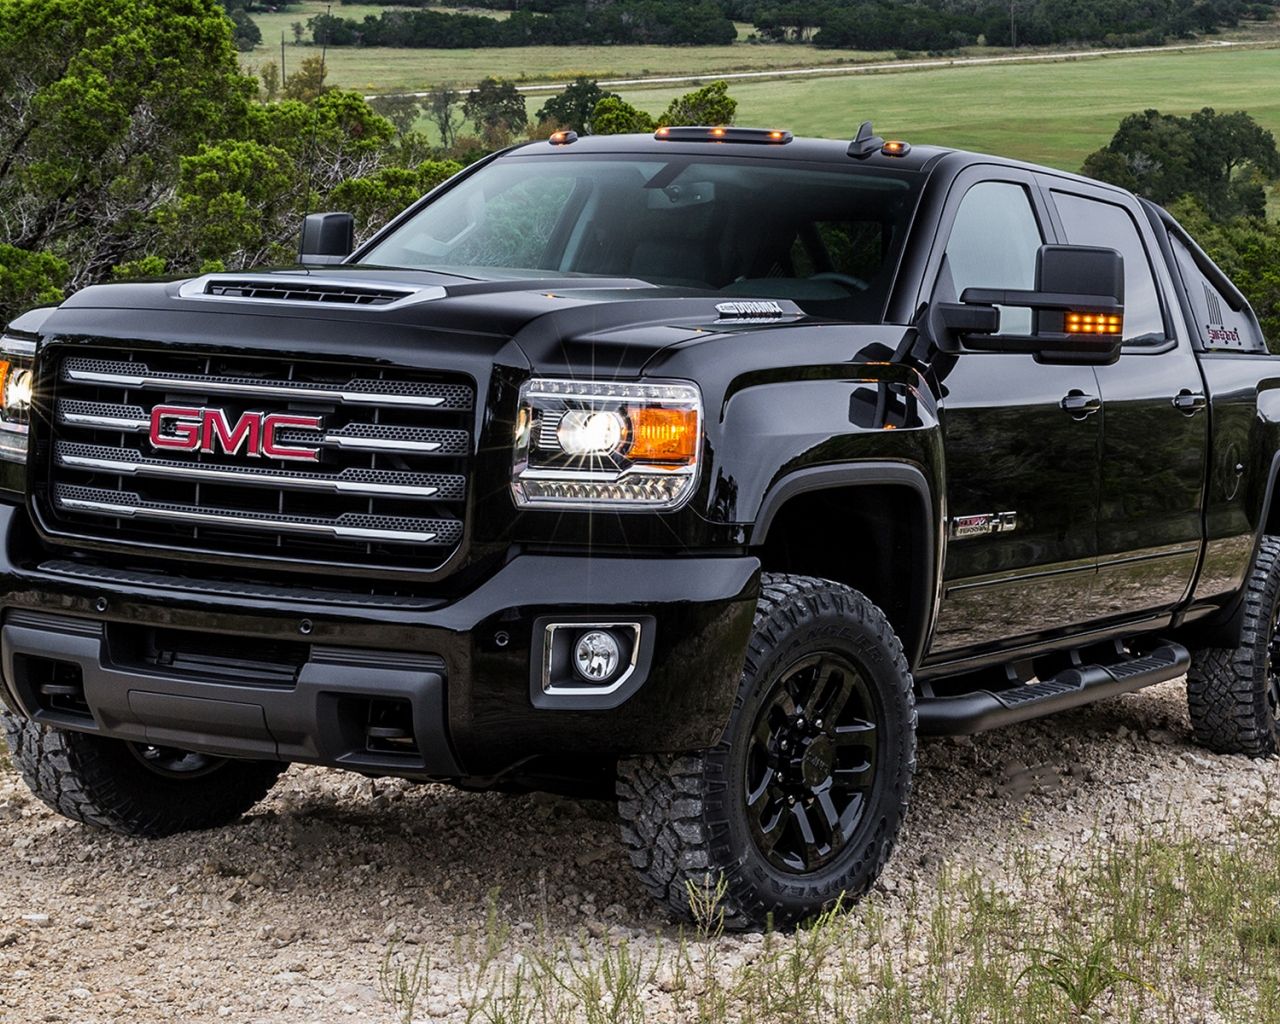 Free download GMC Sierra Wallpaper and Background Image stmednet [1920x1200] for your Desktop, Mobile & Tablet. Explore GMC Background. GMC Background, GMC Wallpaper, GMC Canyon Wallpaper